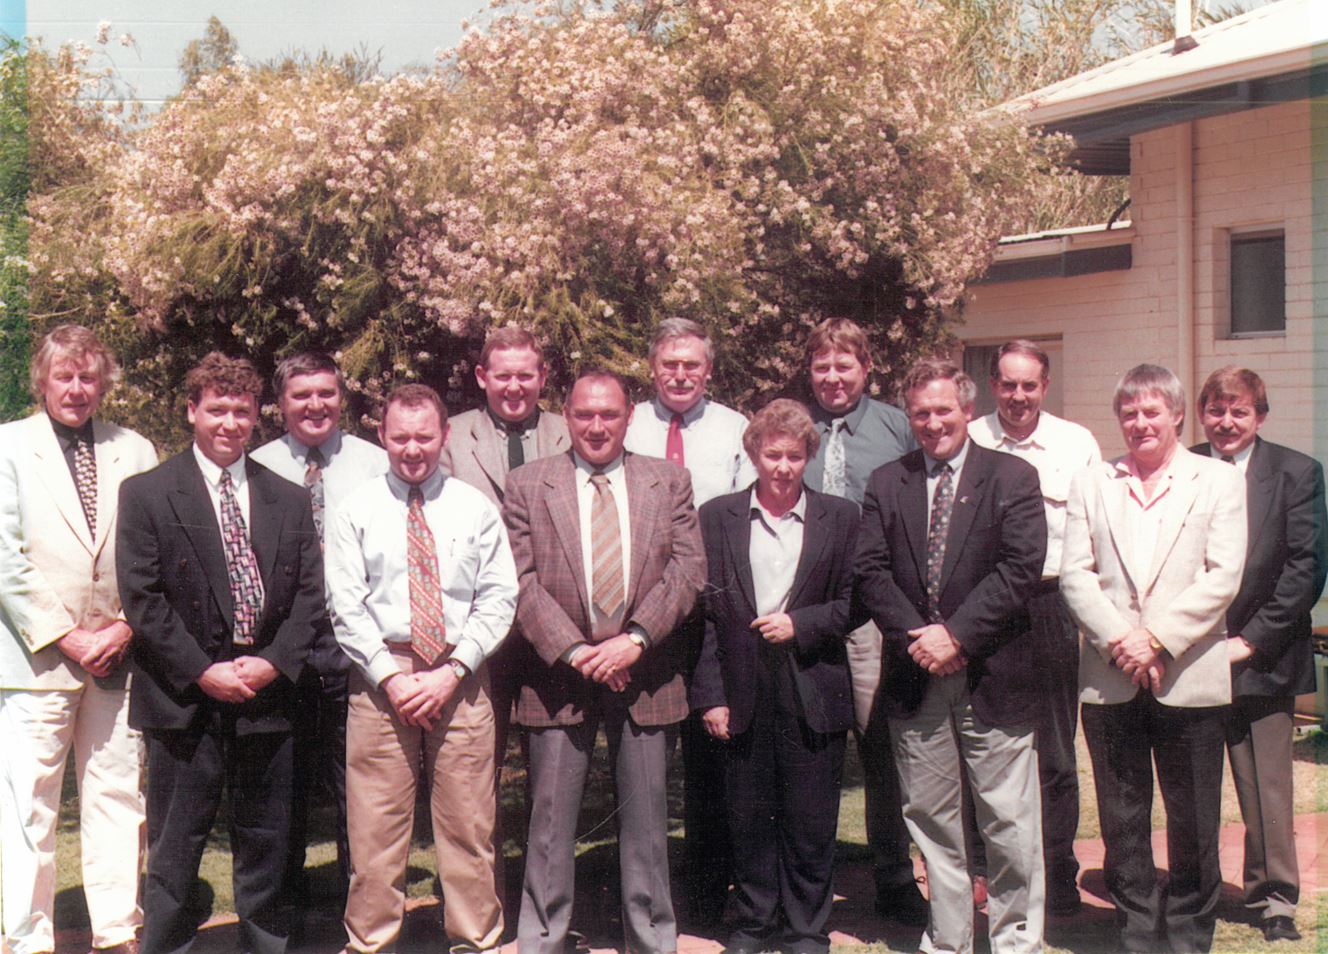 A group of men and women wearing suit and ties in a staff photo from 1990s